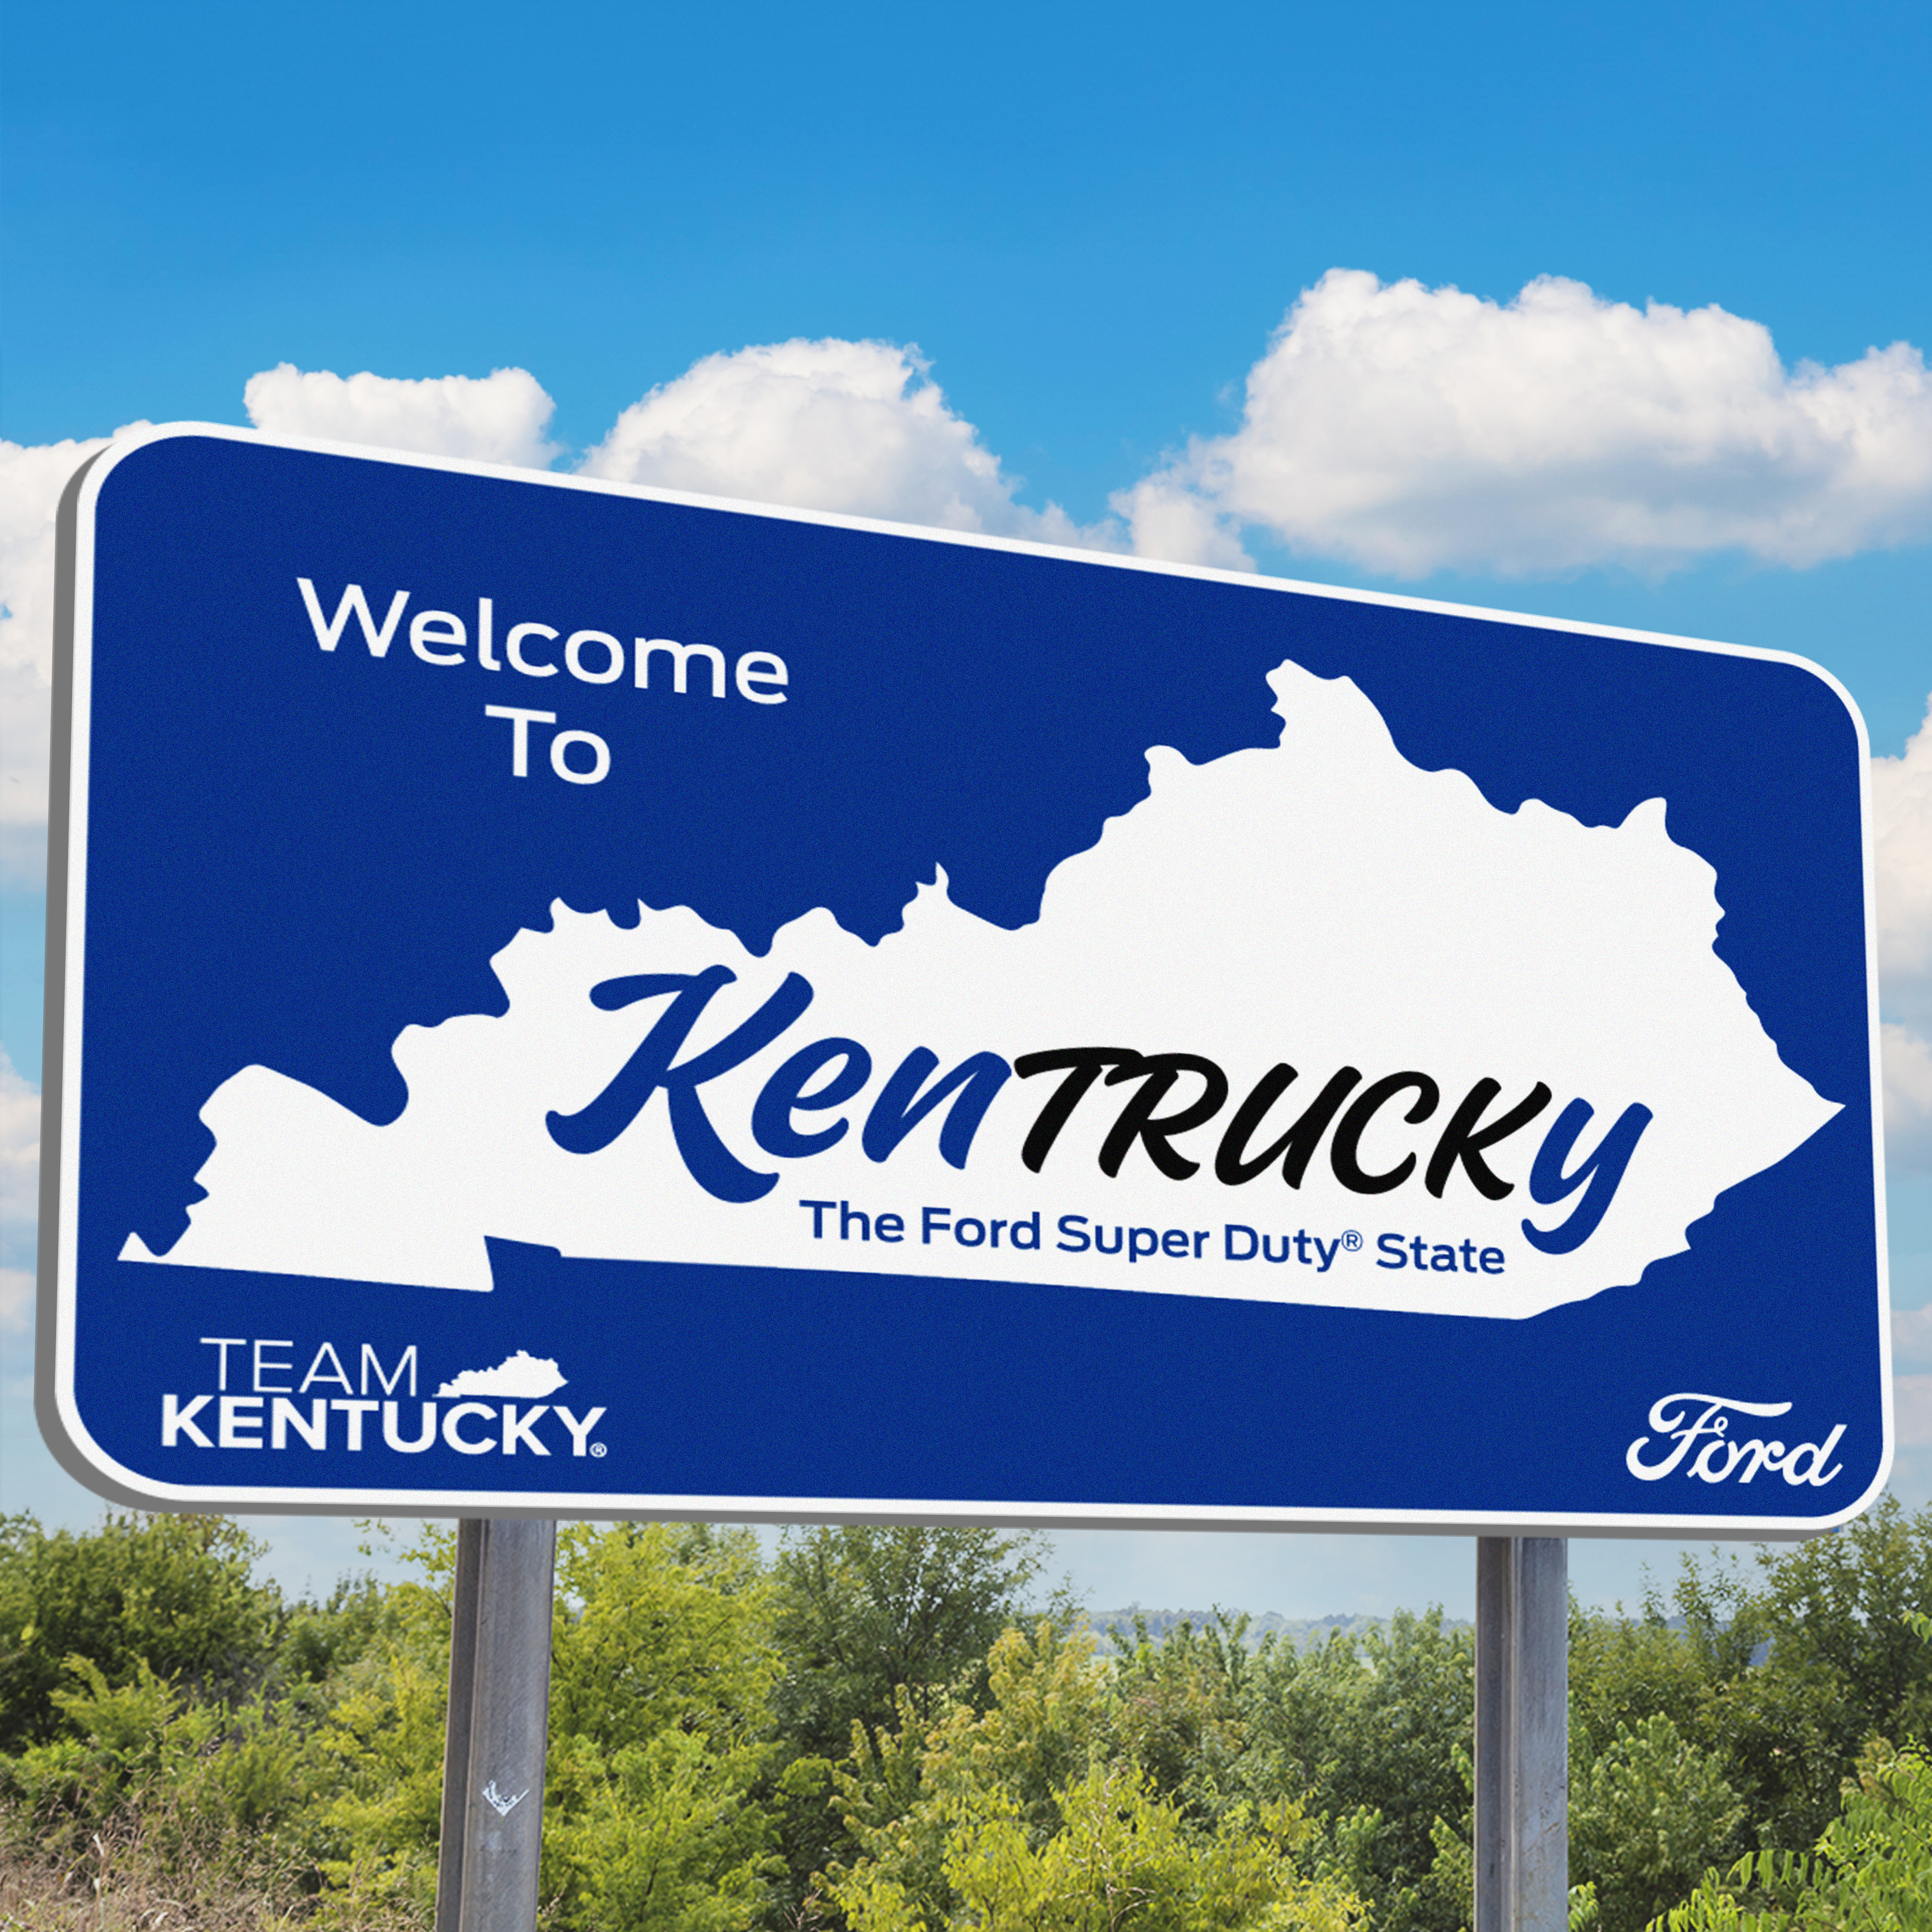 For One Day Only, Kentucky Will Be “KenTRUCKy”